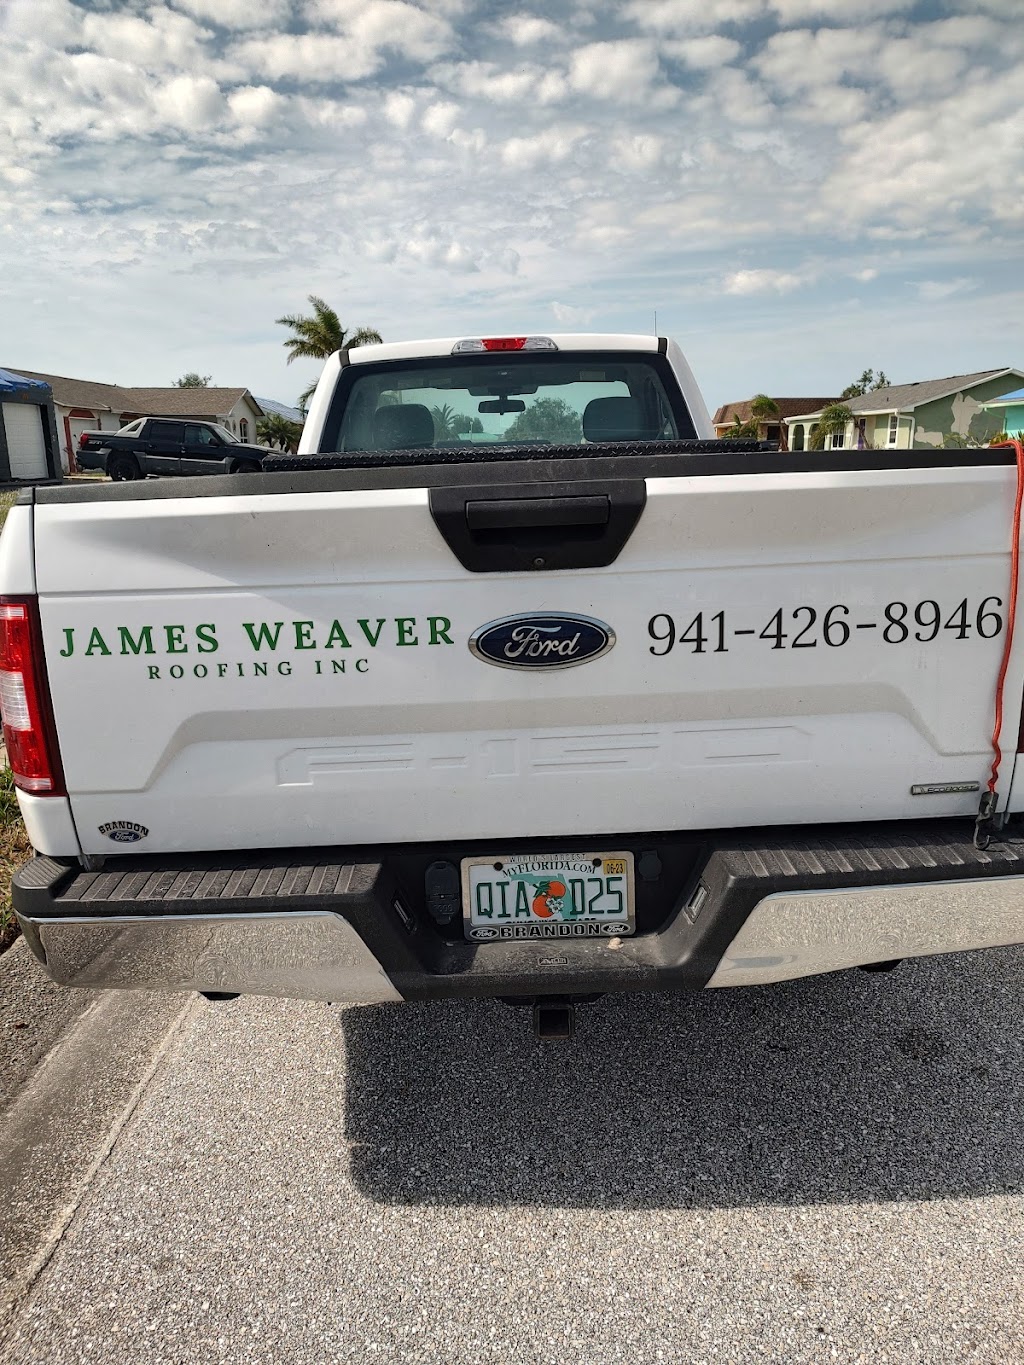 James Weaver Roofing Inc. | 1090 Innovation Ave A127, North Port, FL 34289, USA | Phone: (941) 294-2035